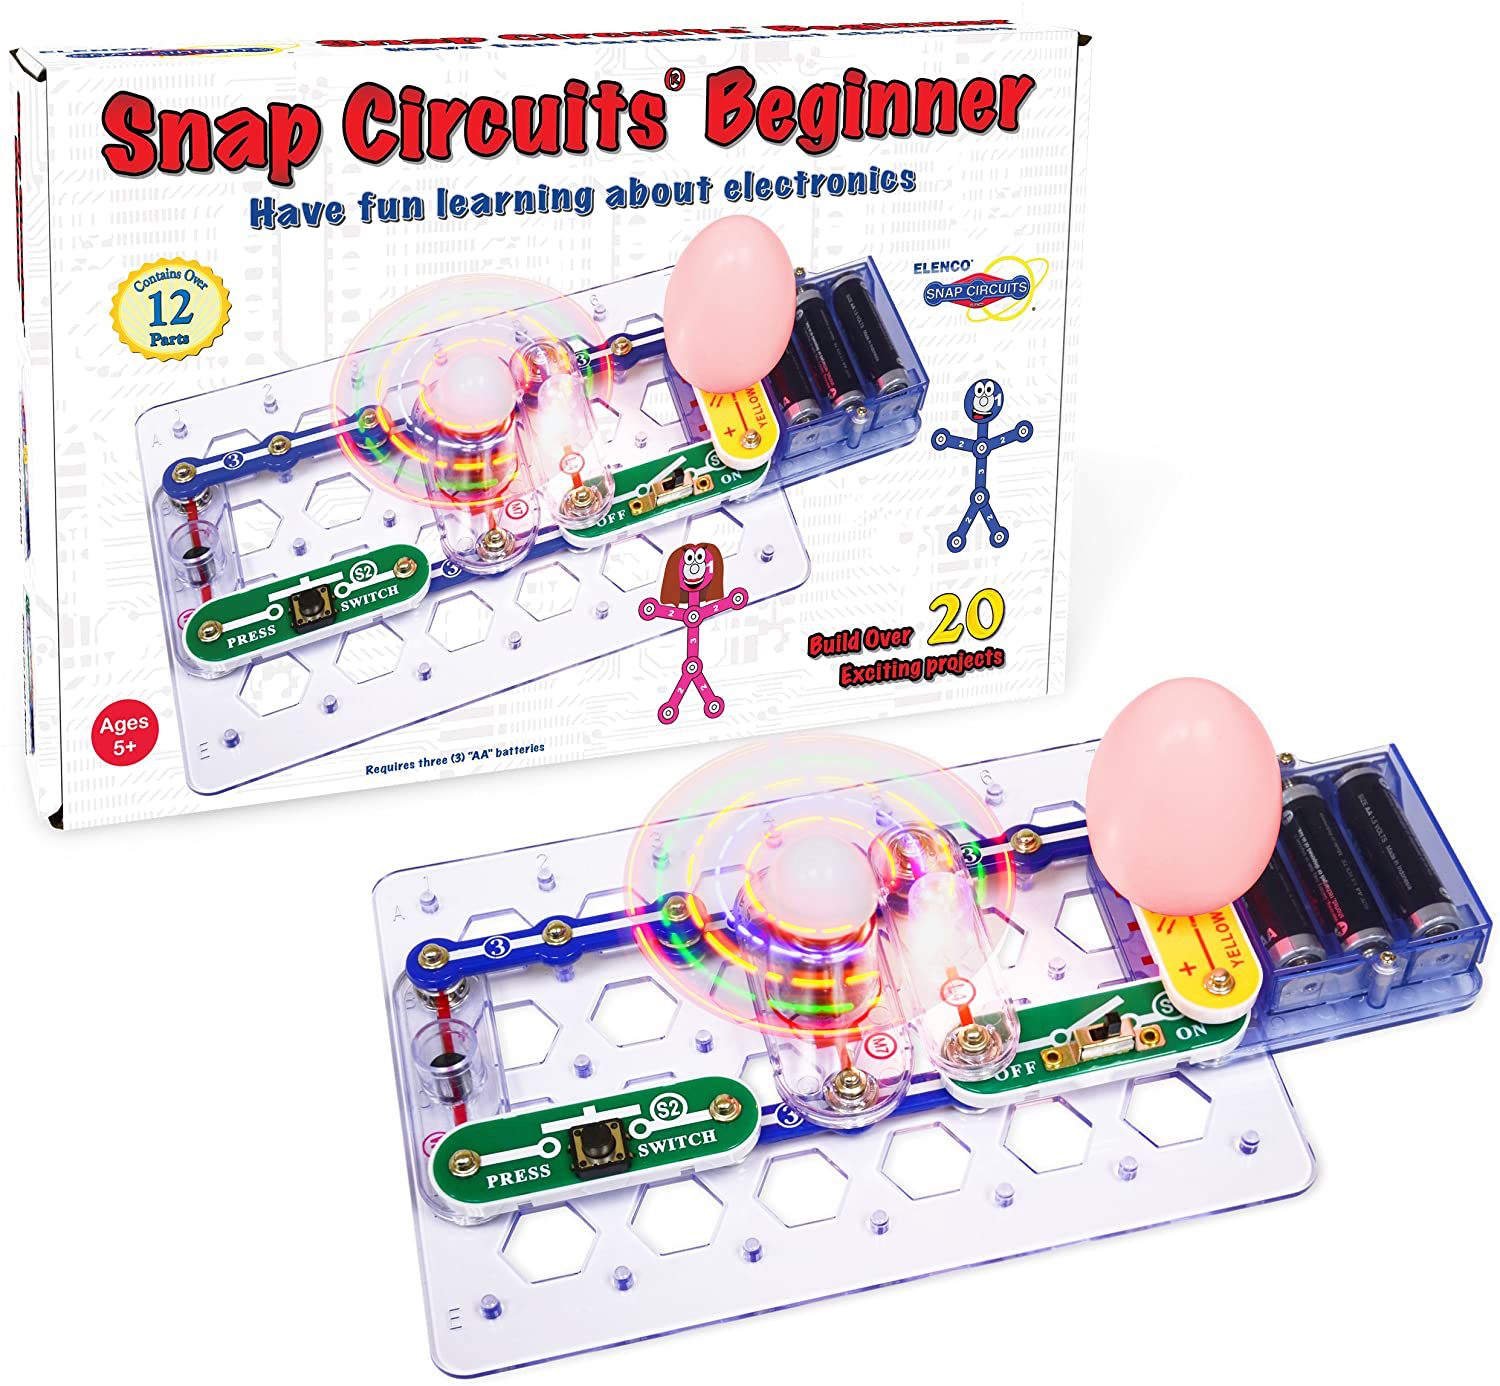 Snap Circuits Beginner, Electronics Exploration Kit, Stem Kit For Ages 5-9 (SCB-20)